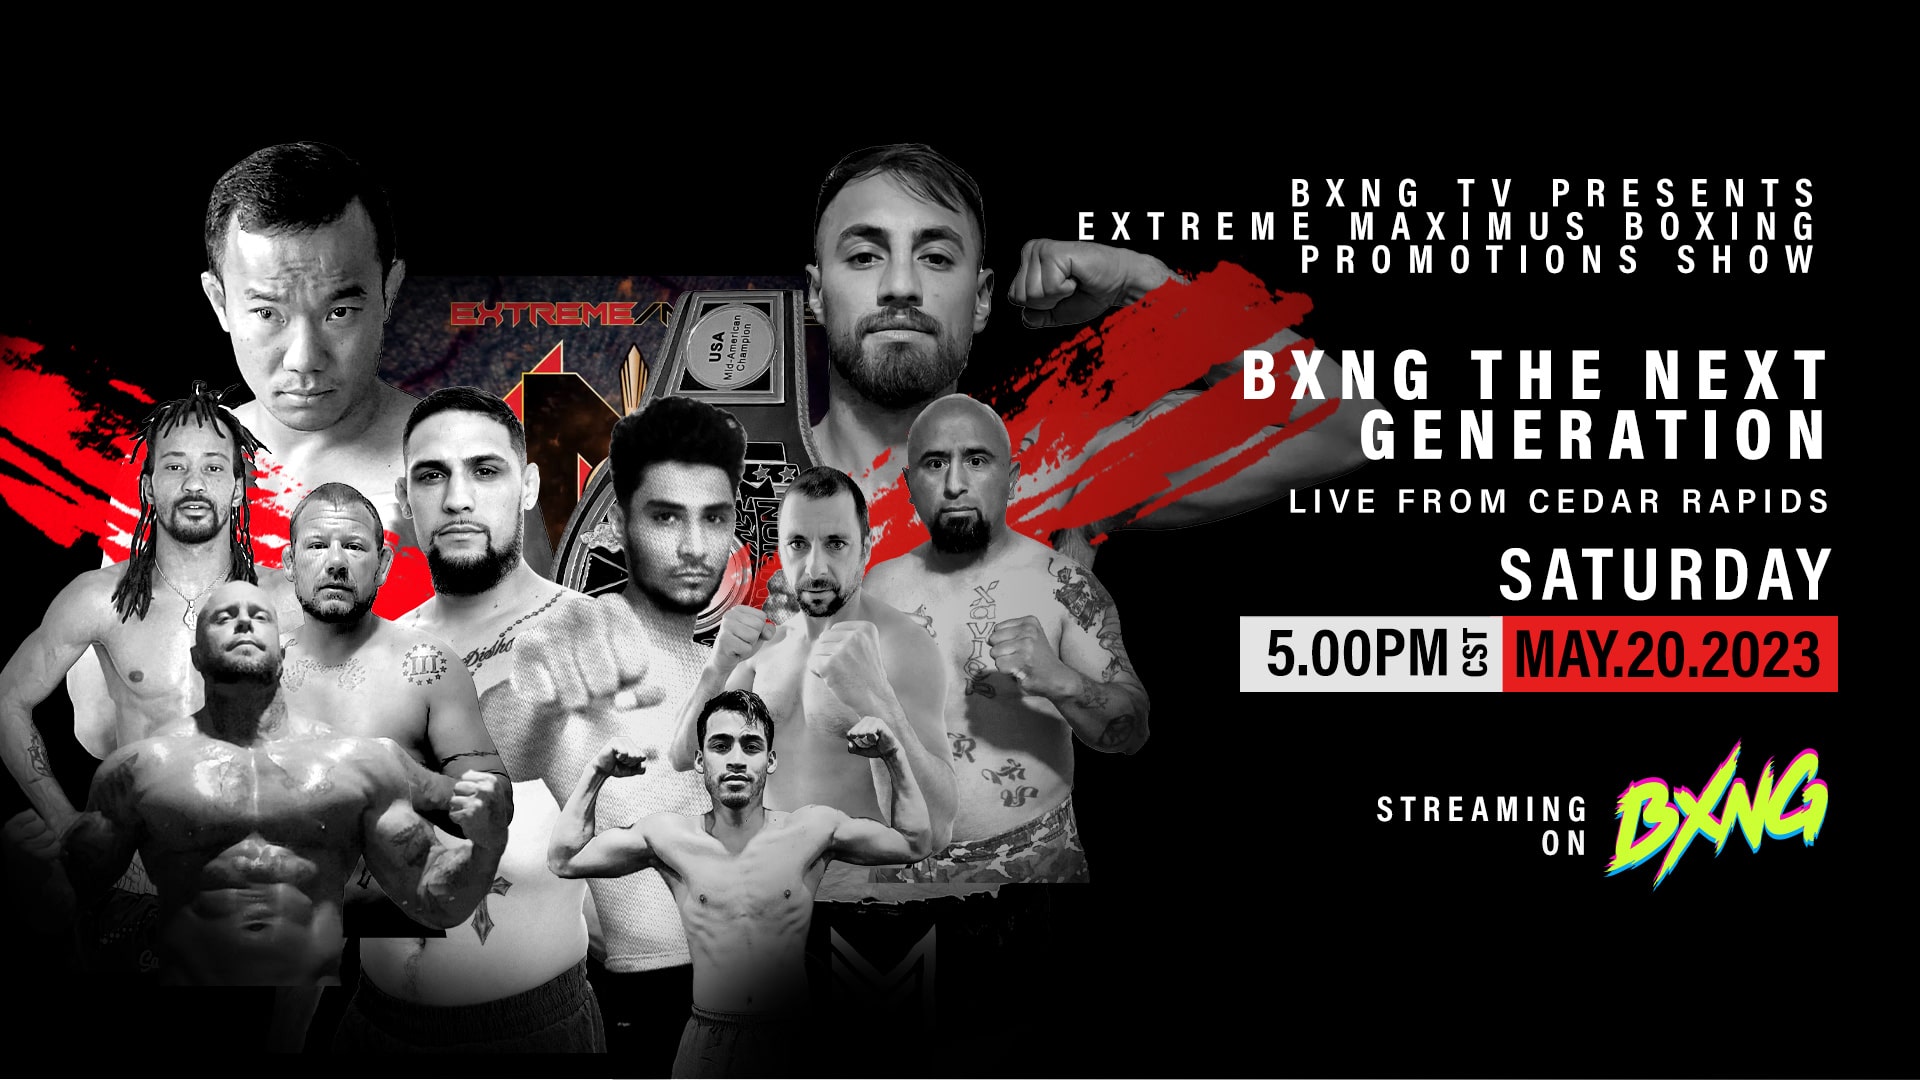 BXNG TV Presents Extreme Maximus Boxing Promotions Show Live Stream 05/20/23